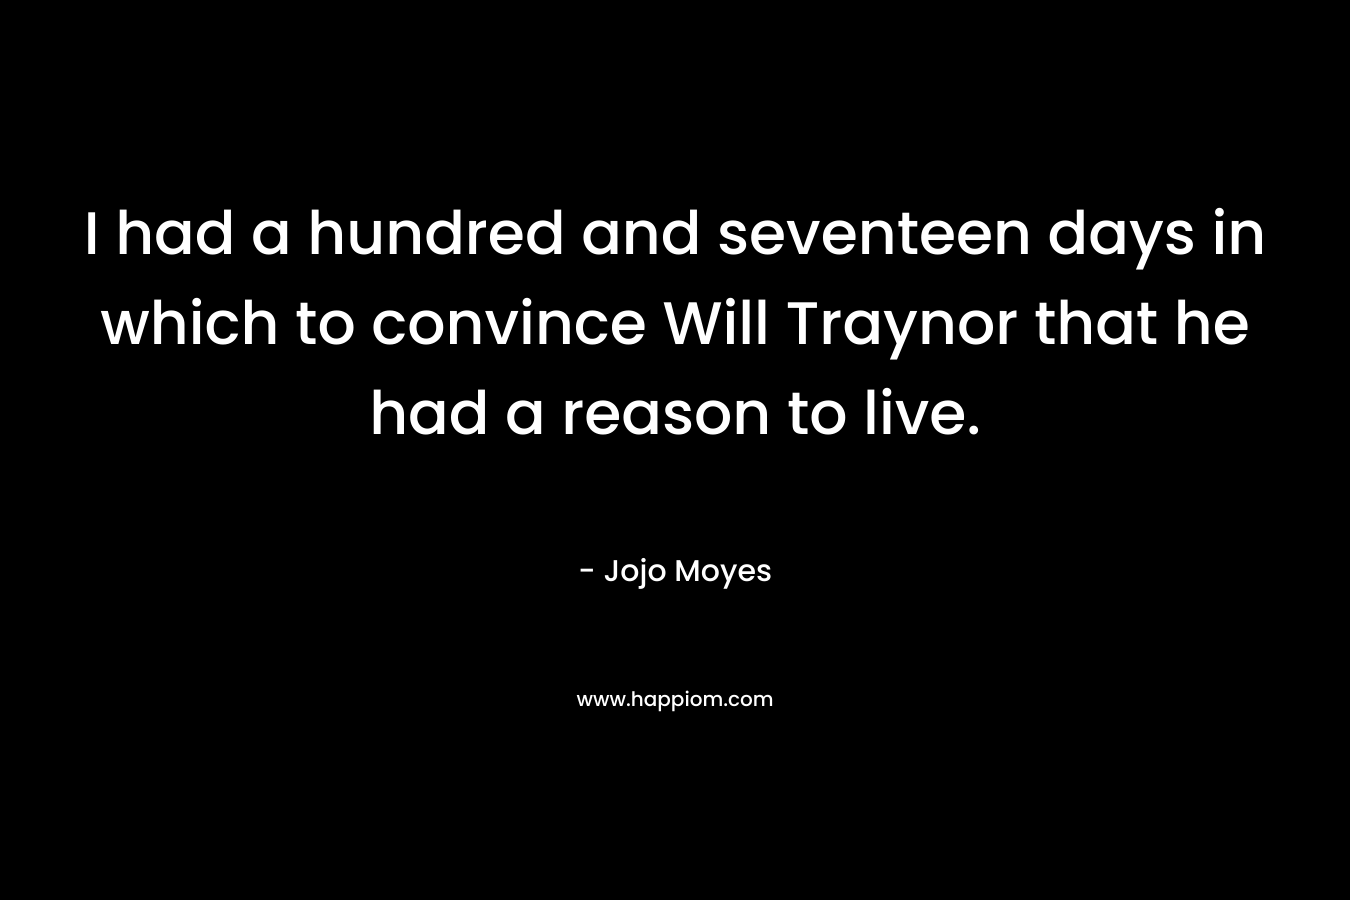 I had a hundred and seventeen days in which to convince Will Traynor that he had a reason to live. – Jojo Moyes